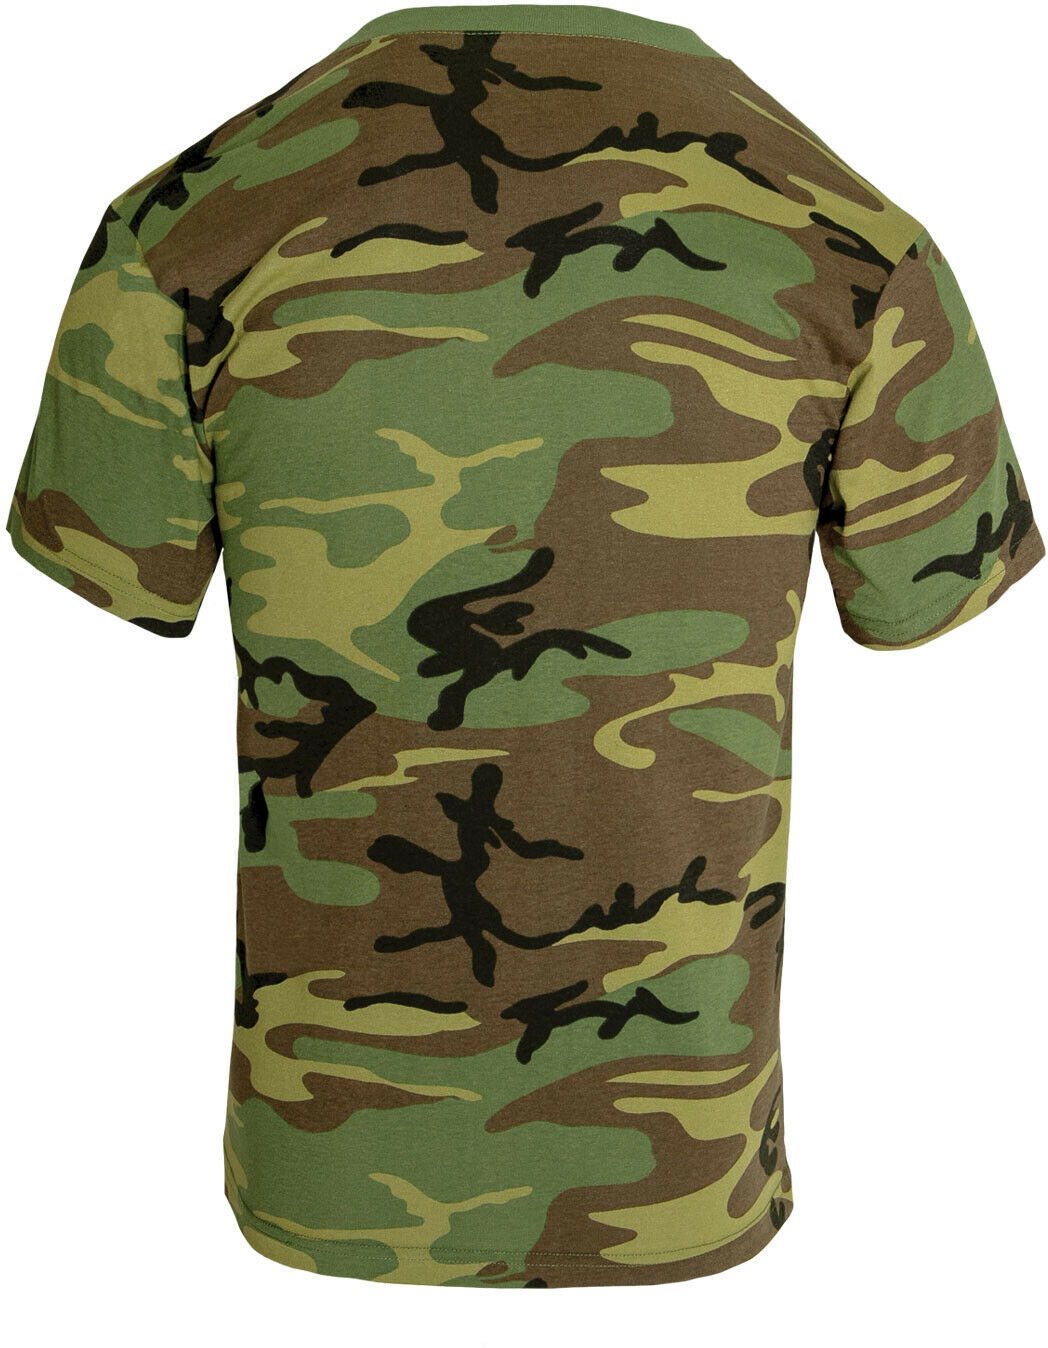 Camo V Neck T-Shirt Tactical Military Tee Mens Woodland Camouflage Army ...